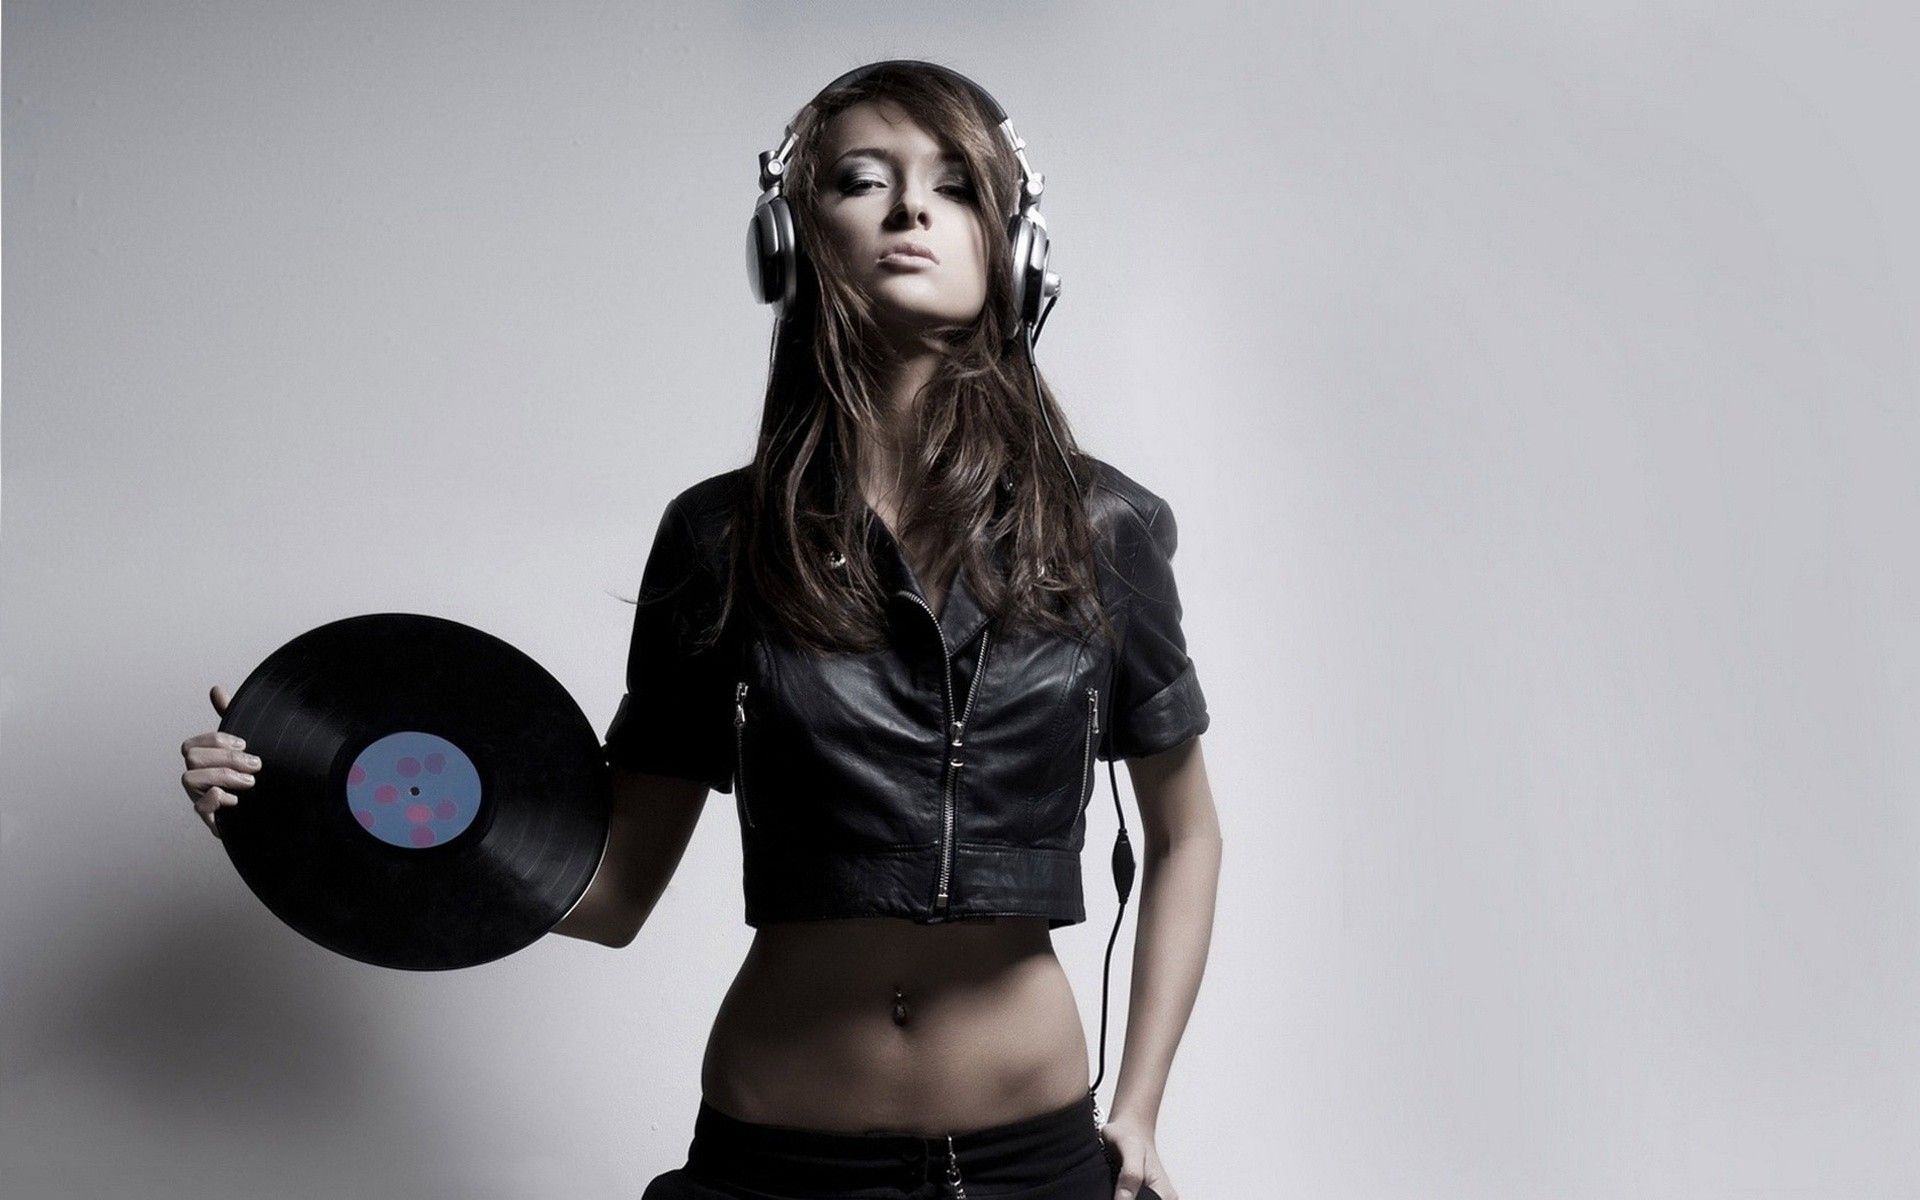 Hot Dj Girl 1366x768 Resolution HD 4k Wallpaper, Image, Background, Photo and Picture